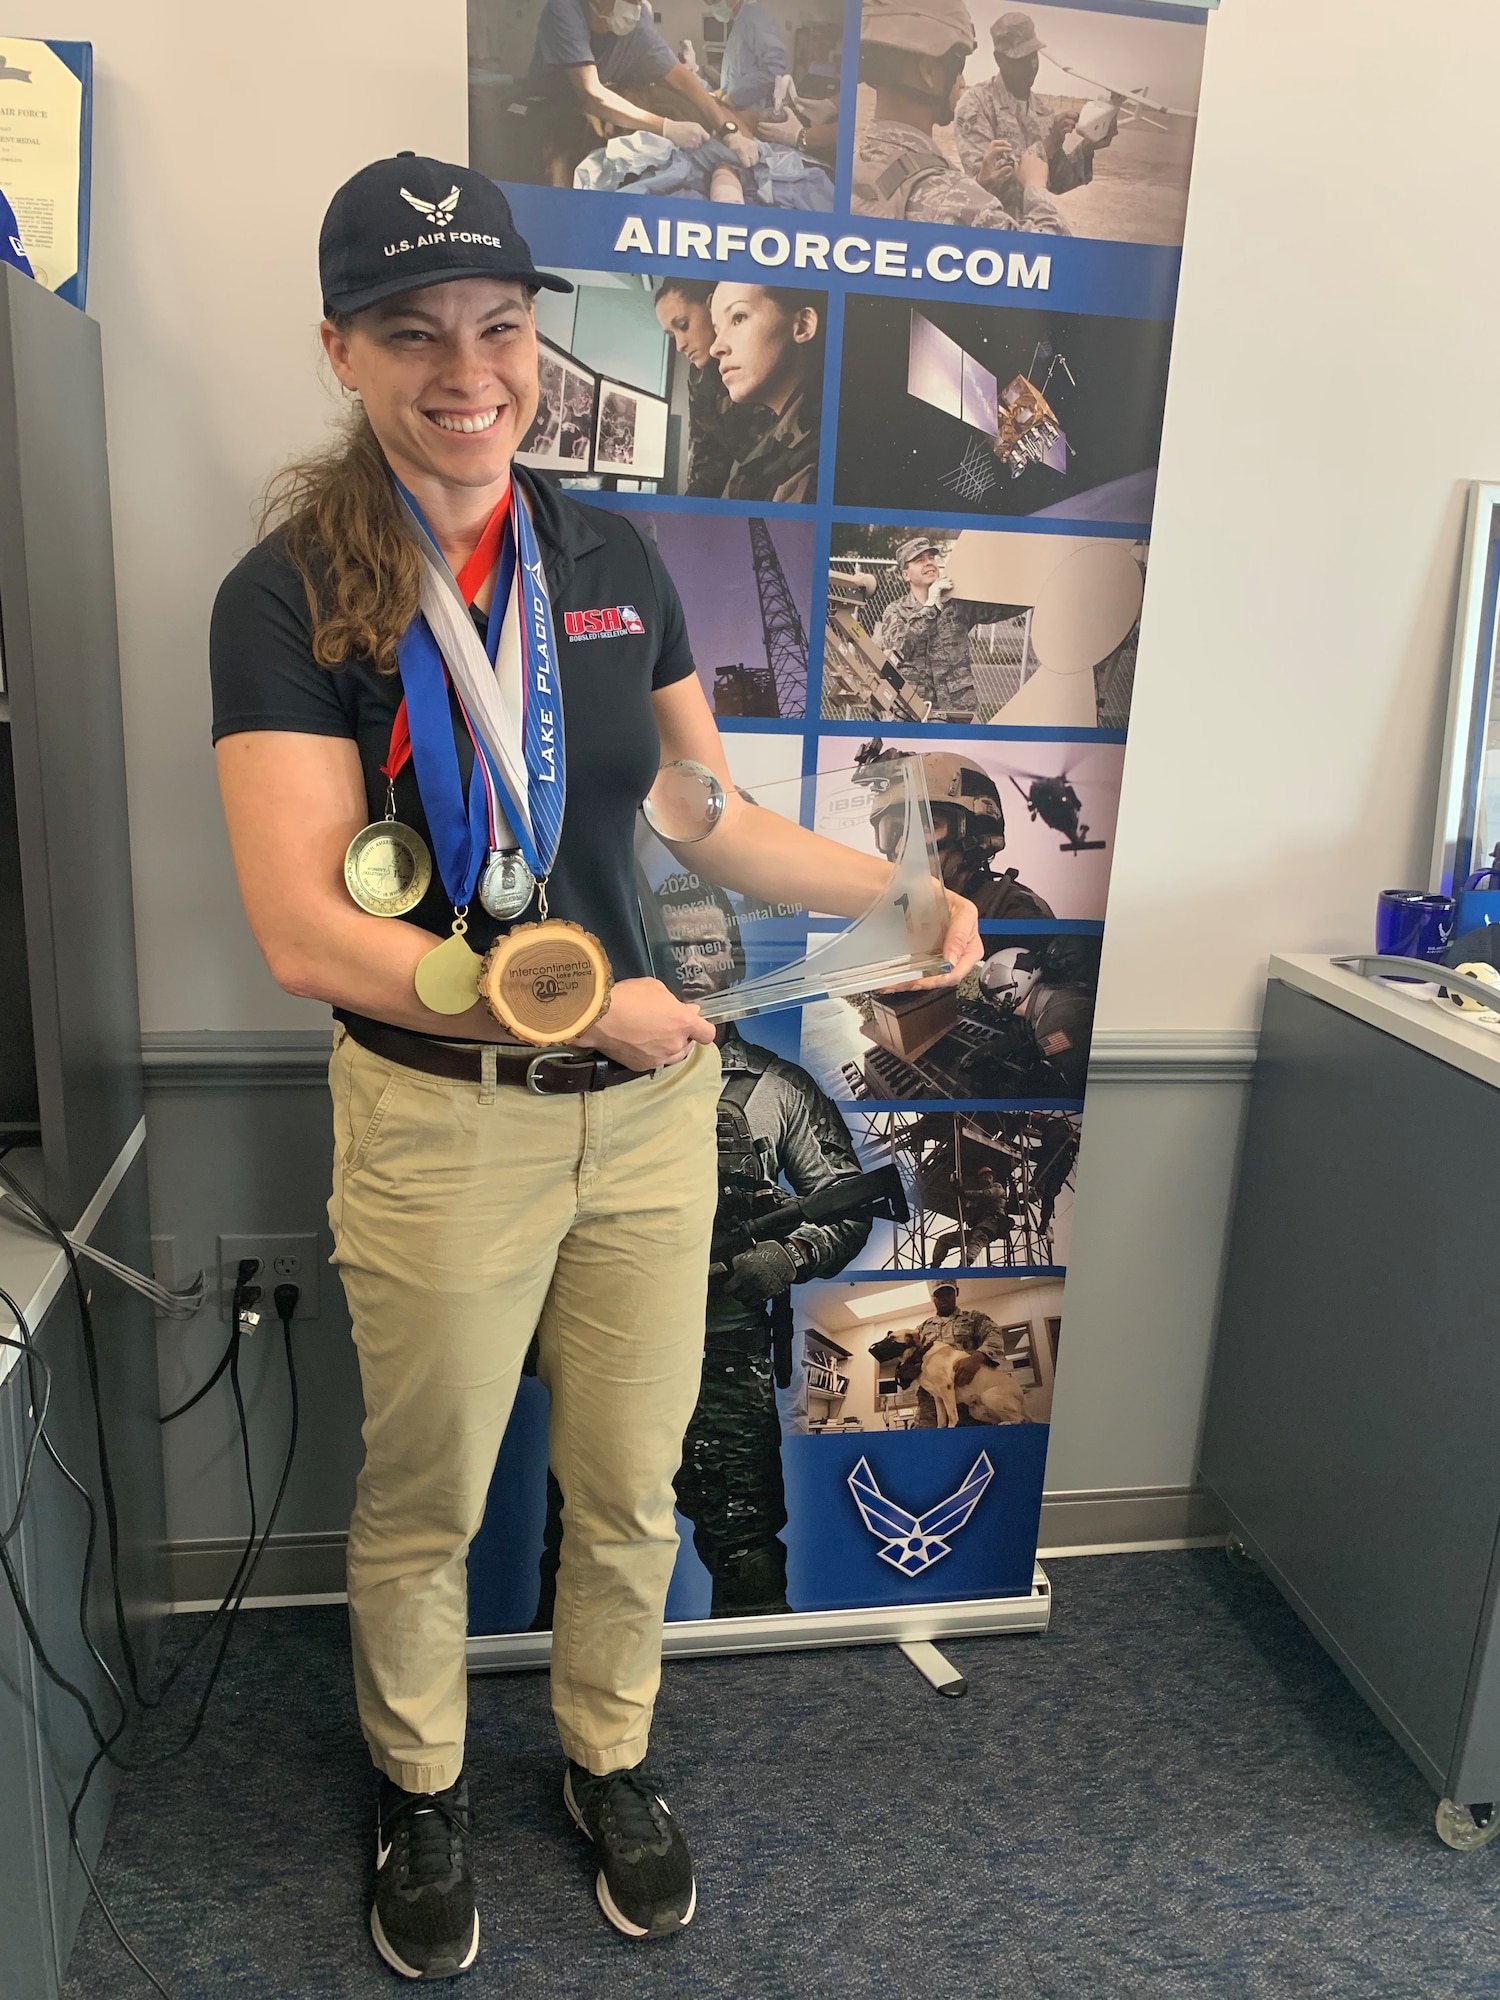 Airman 1st Class Kelly Curtis shows off some of her medals from competing as a member of USA skeleton team.